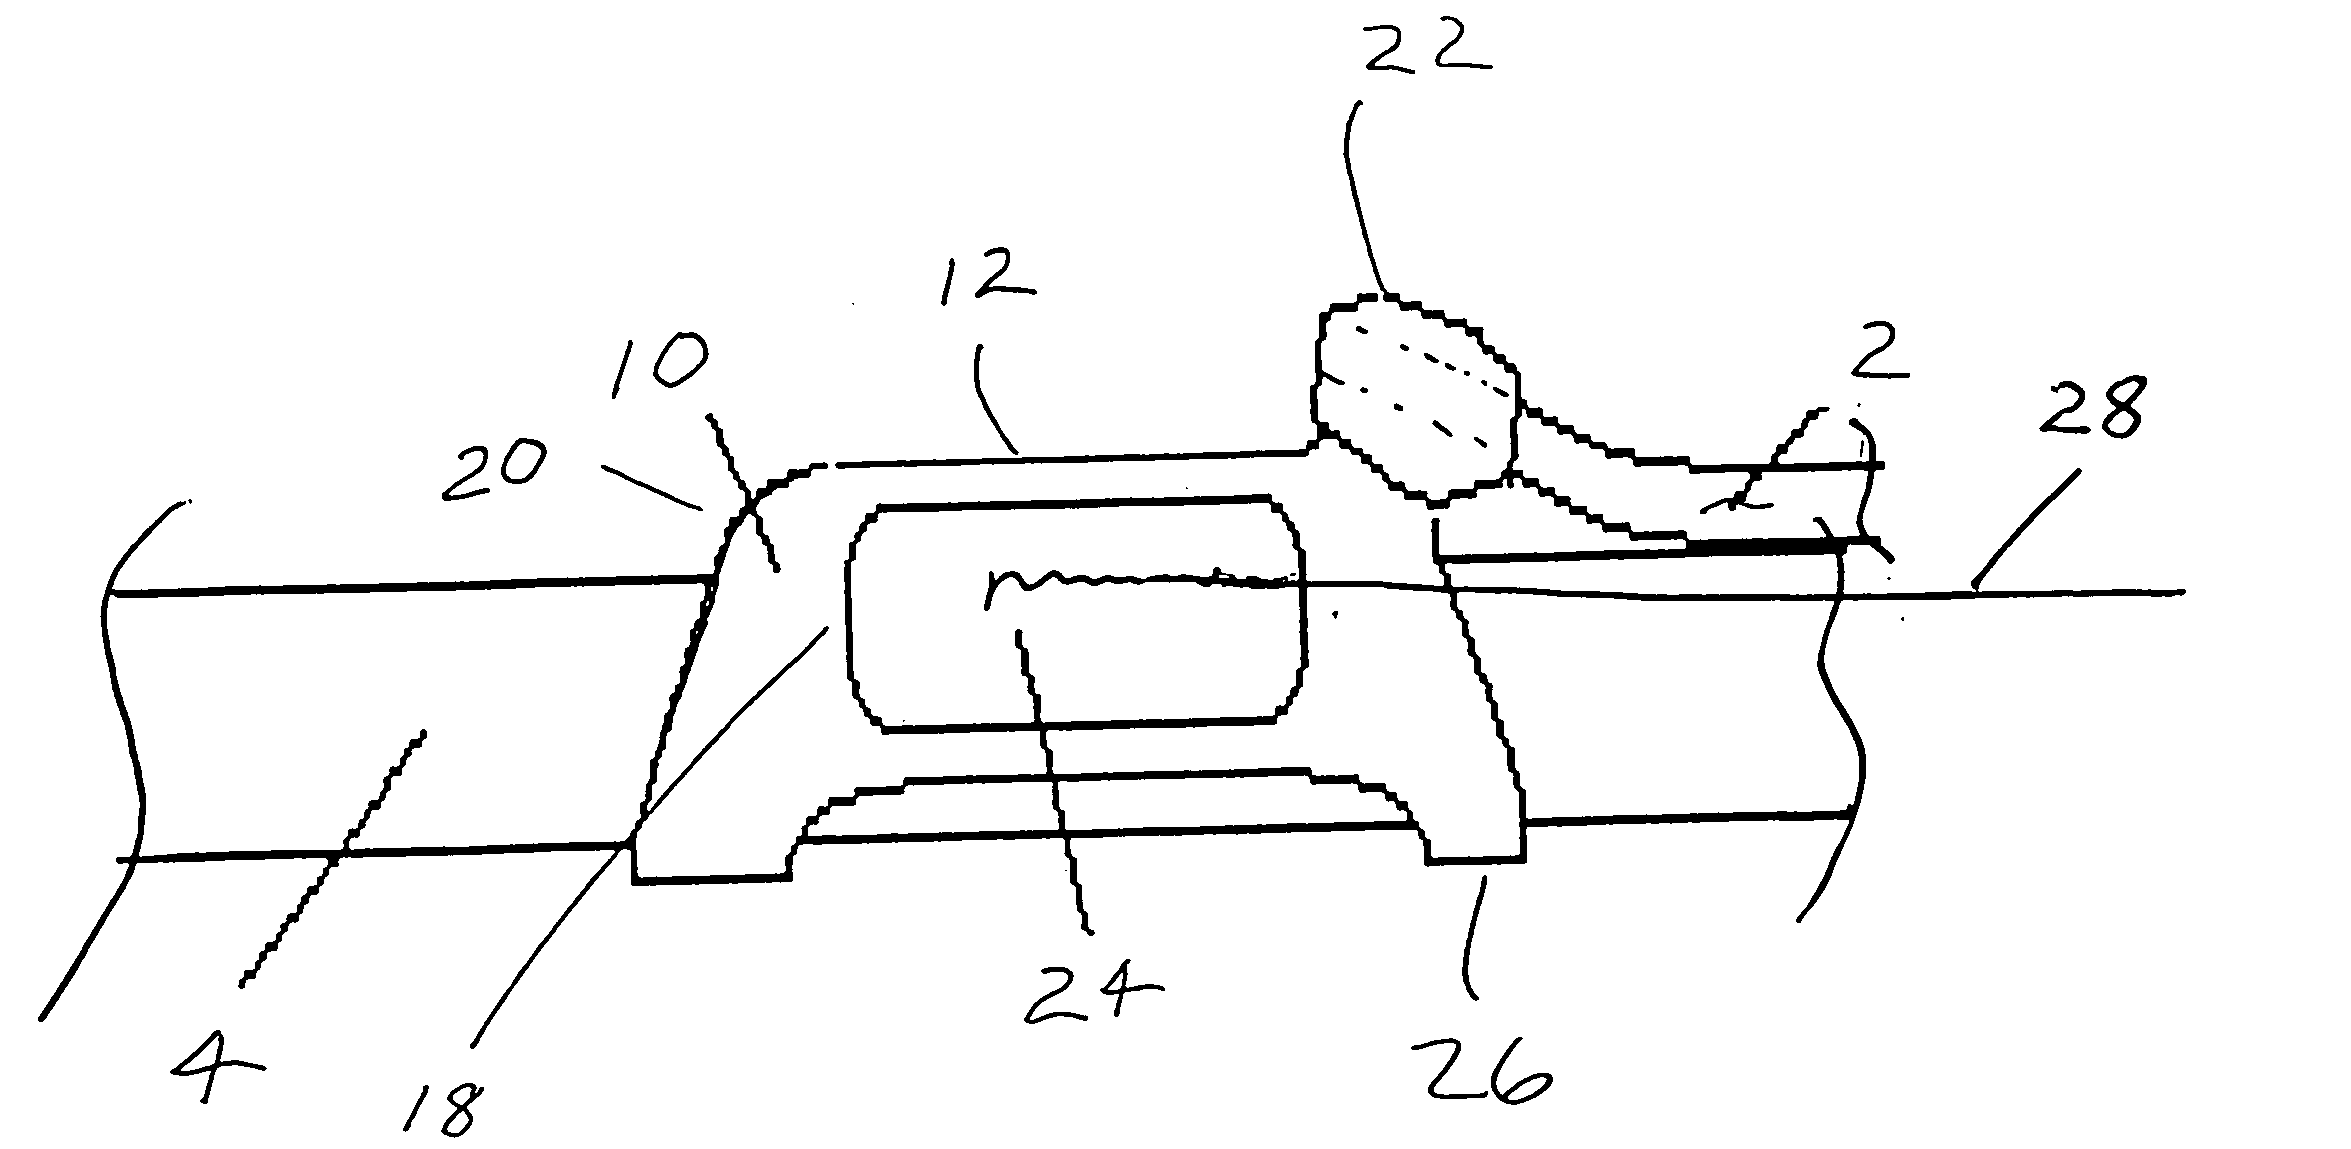 Endotracheal positioning device